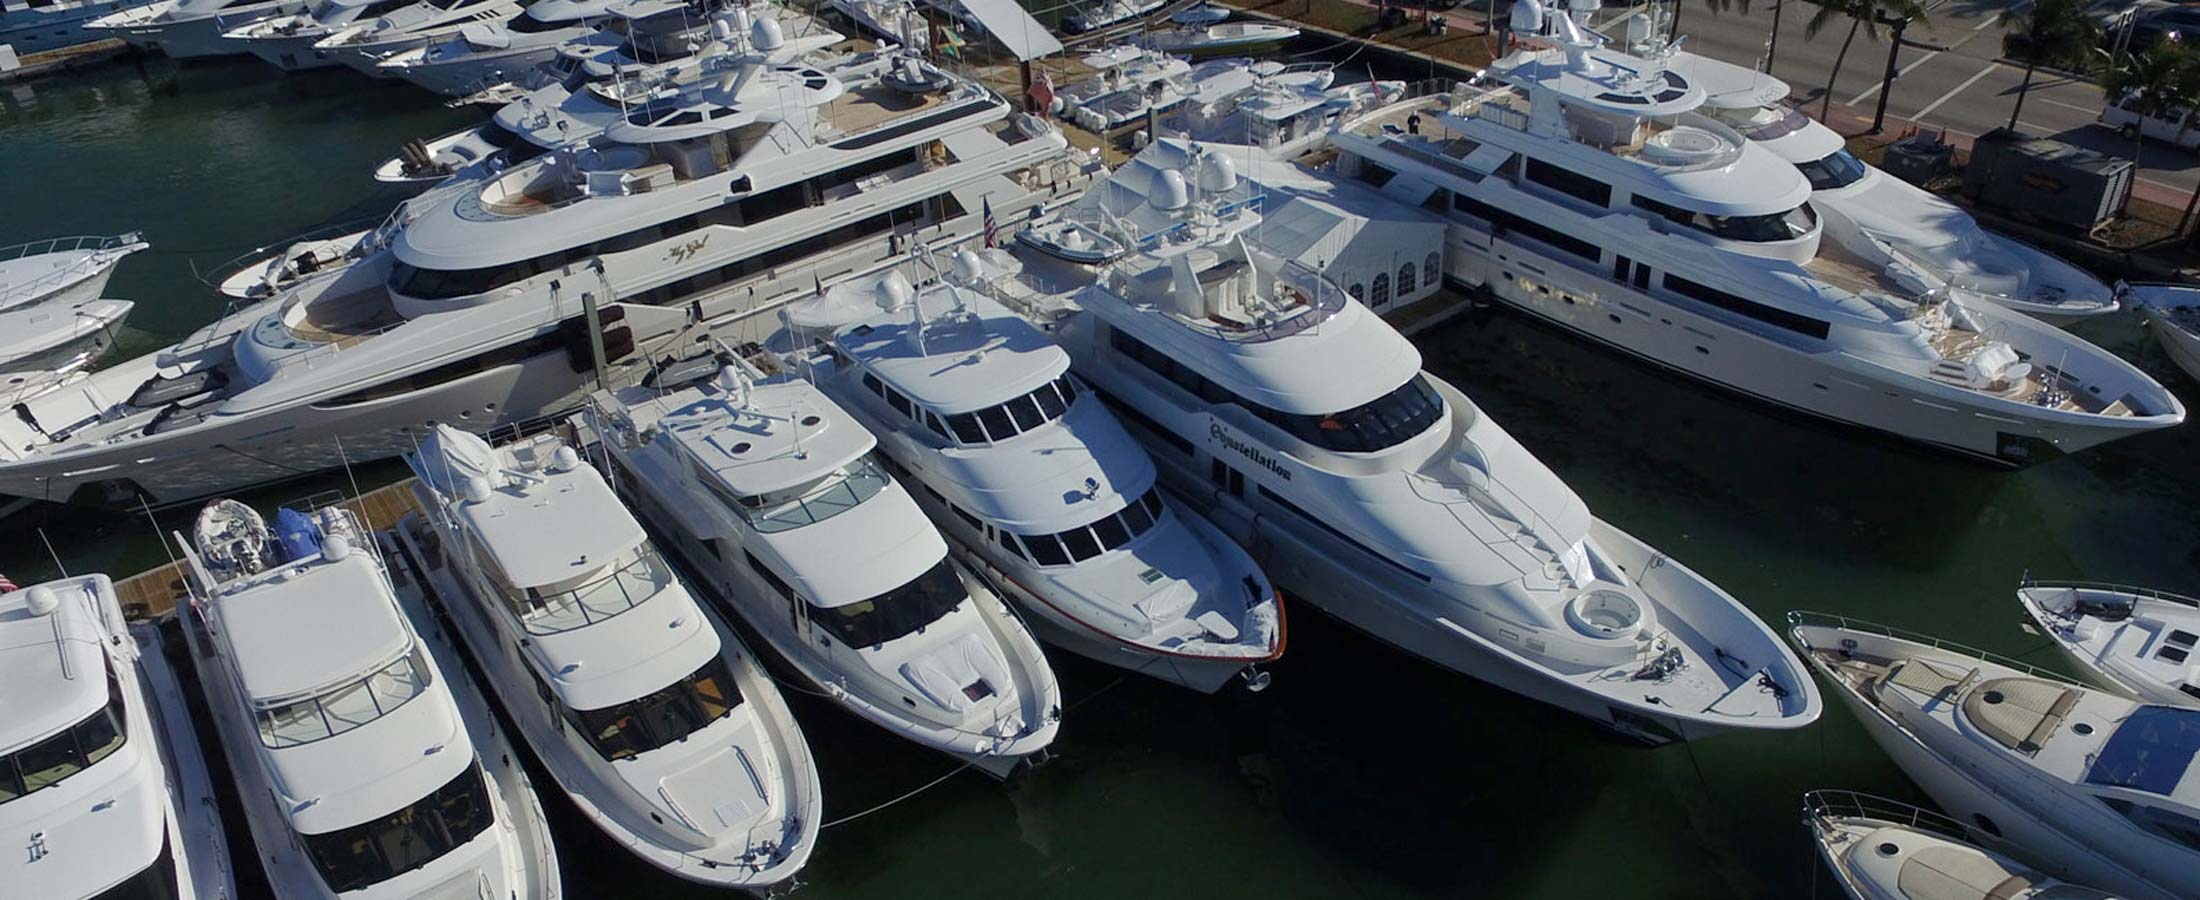 Boat Shows & Yachting Events | Westport Yachts